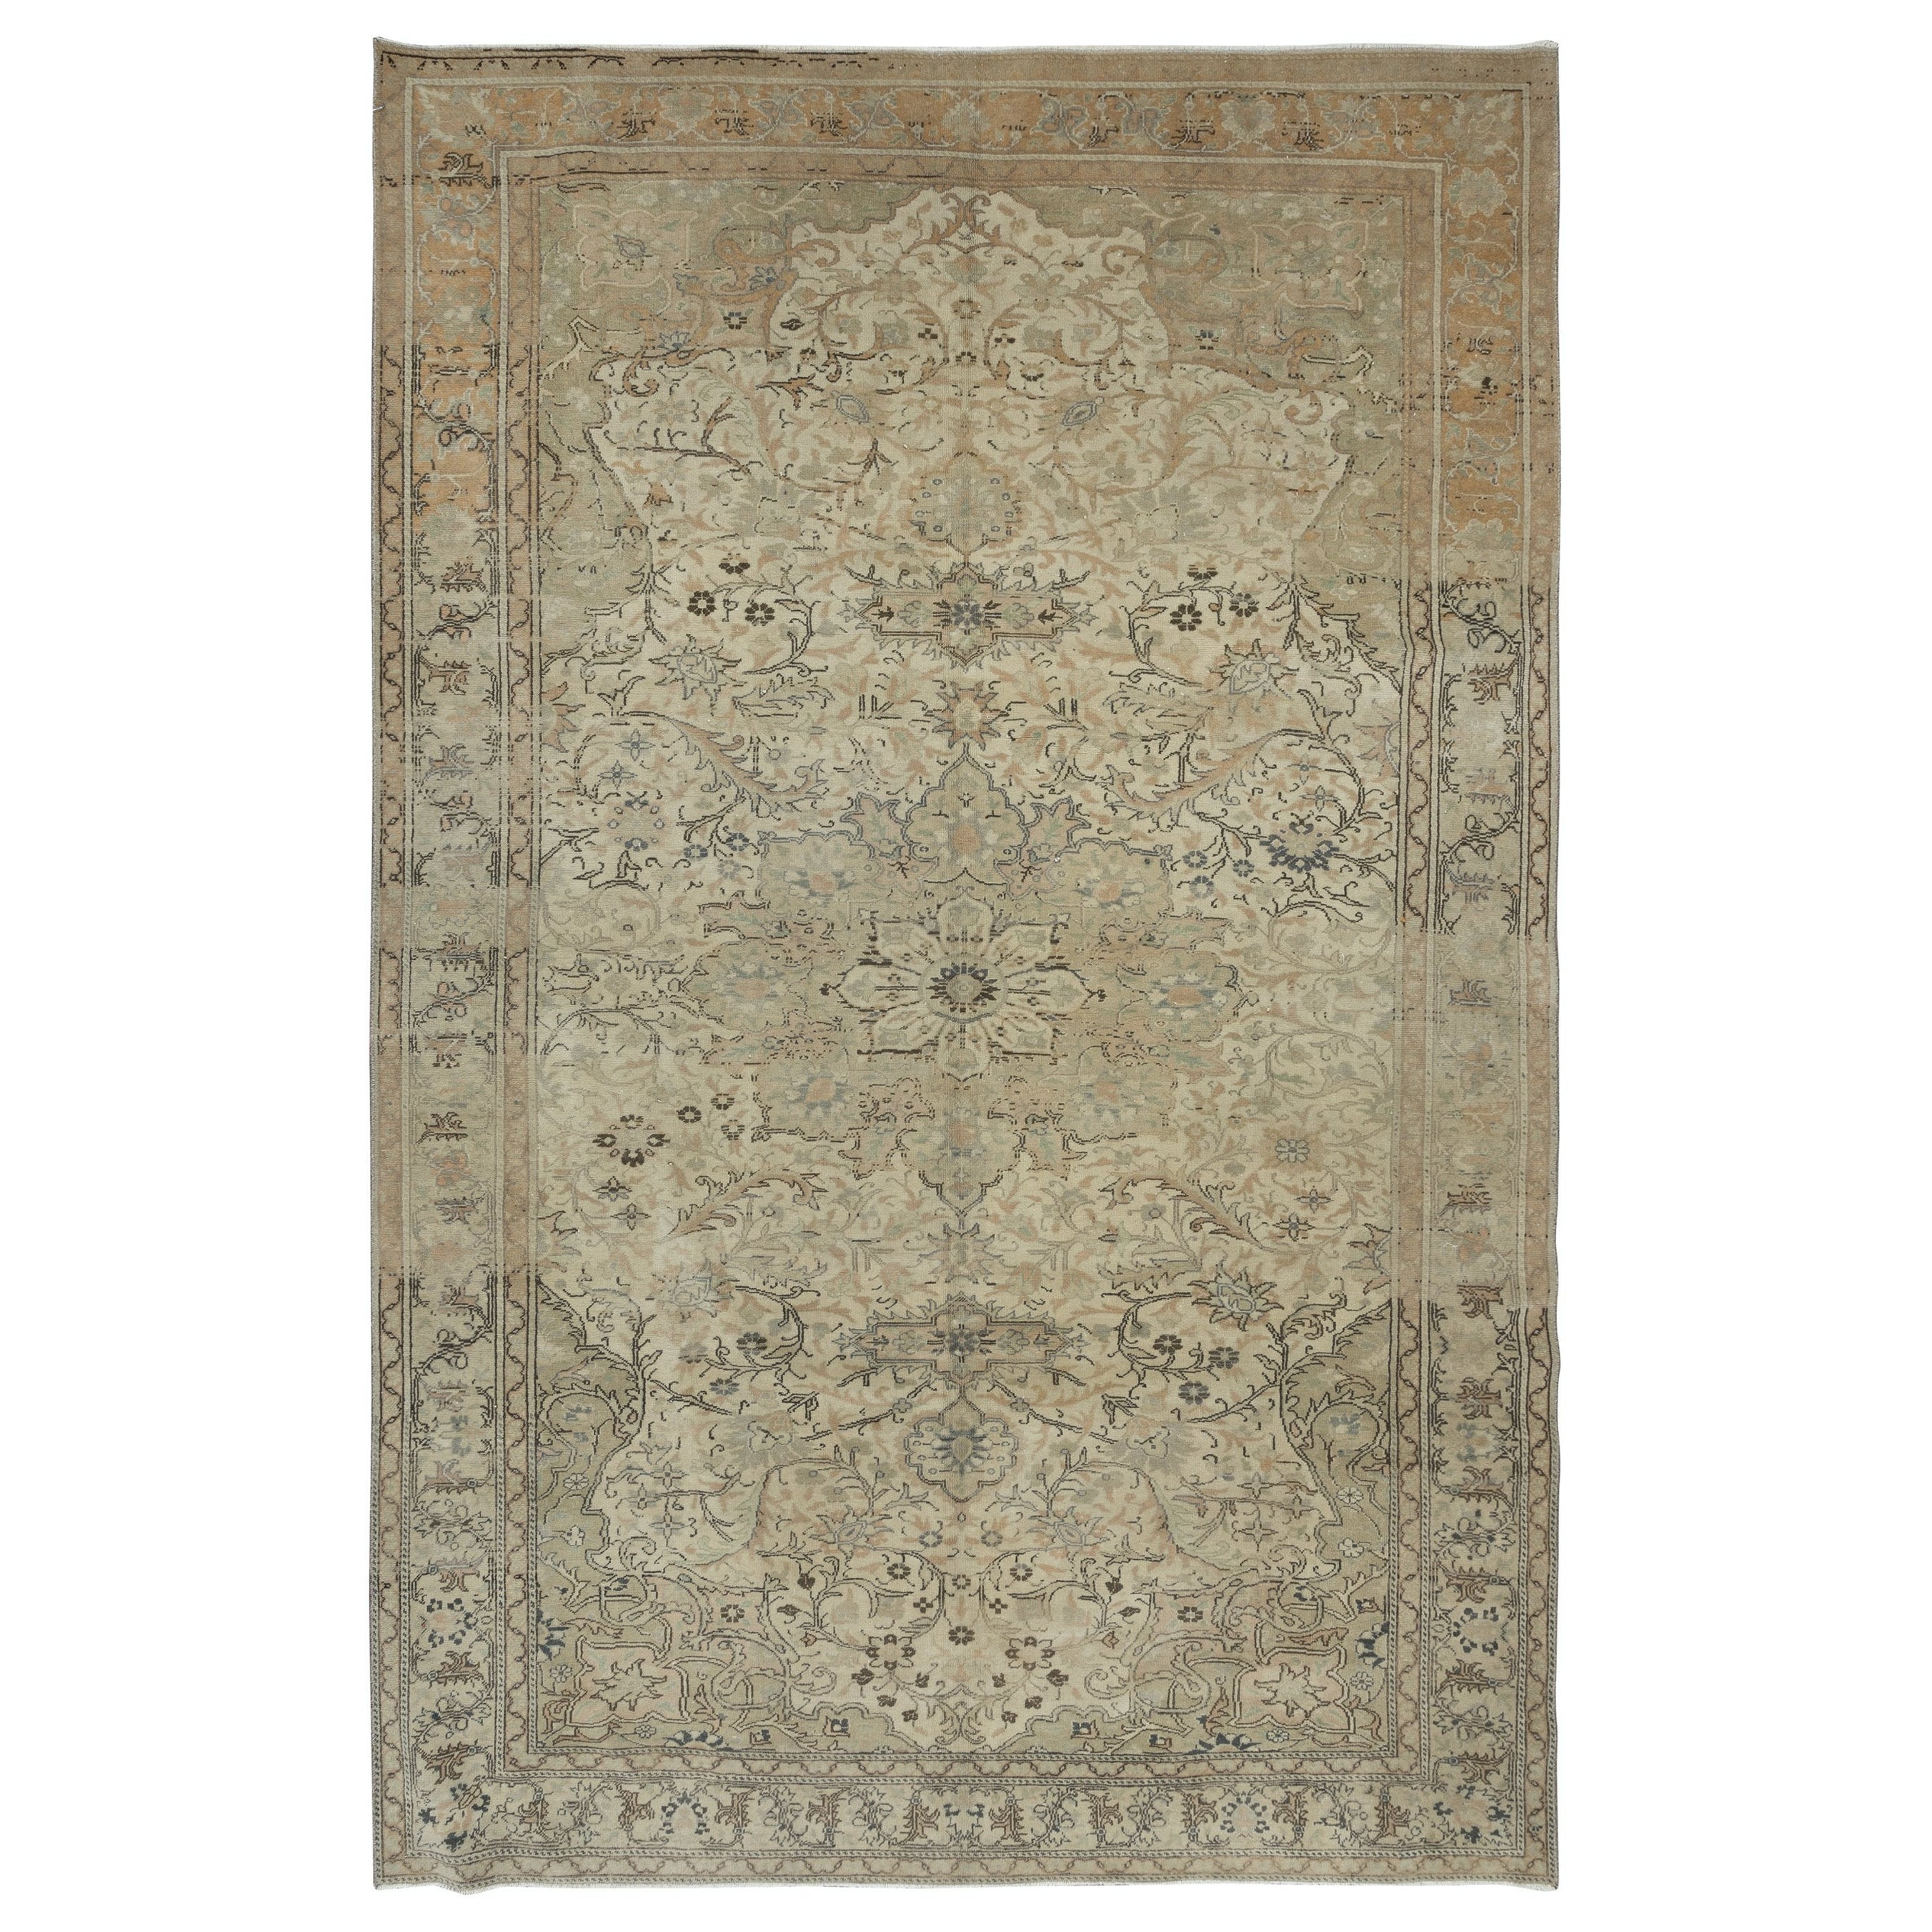 6.7x10 Ft Unique Vintage Handmade Rug in Beige, Faded Anatolian Oushak Carpet For Sale